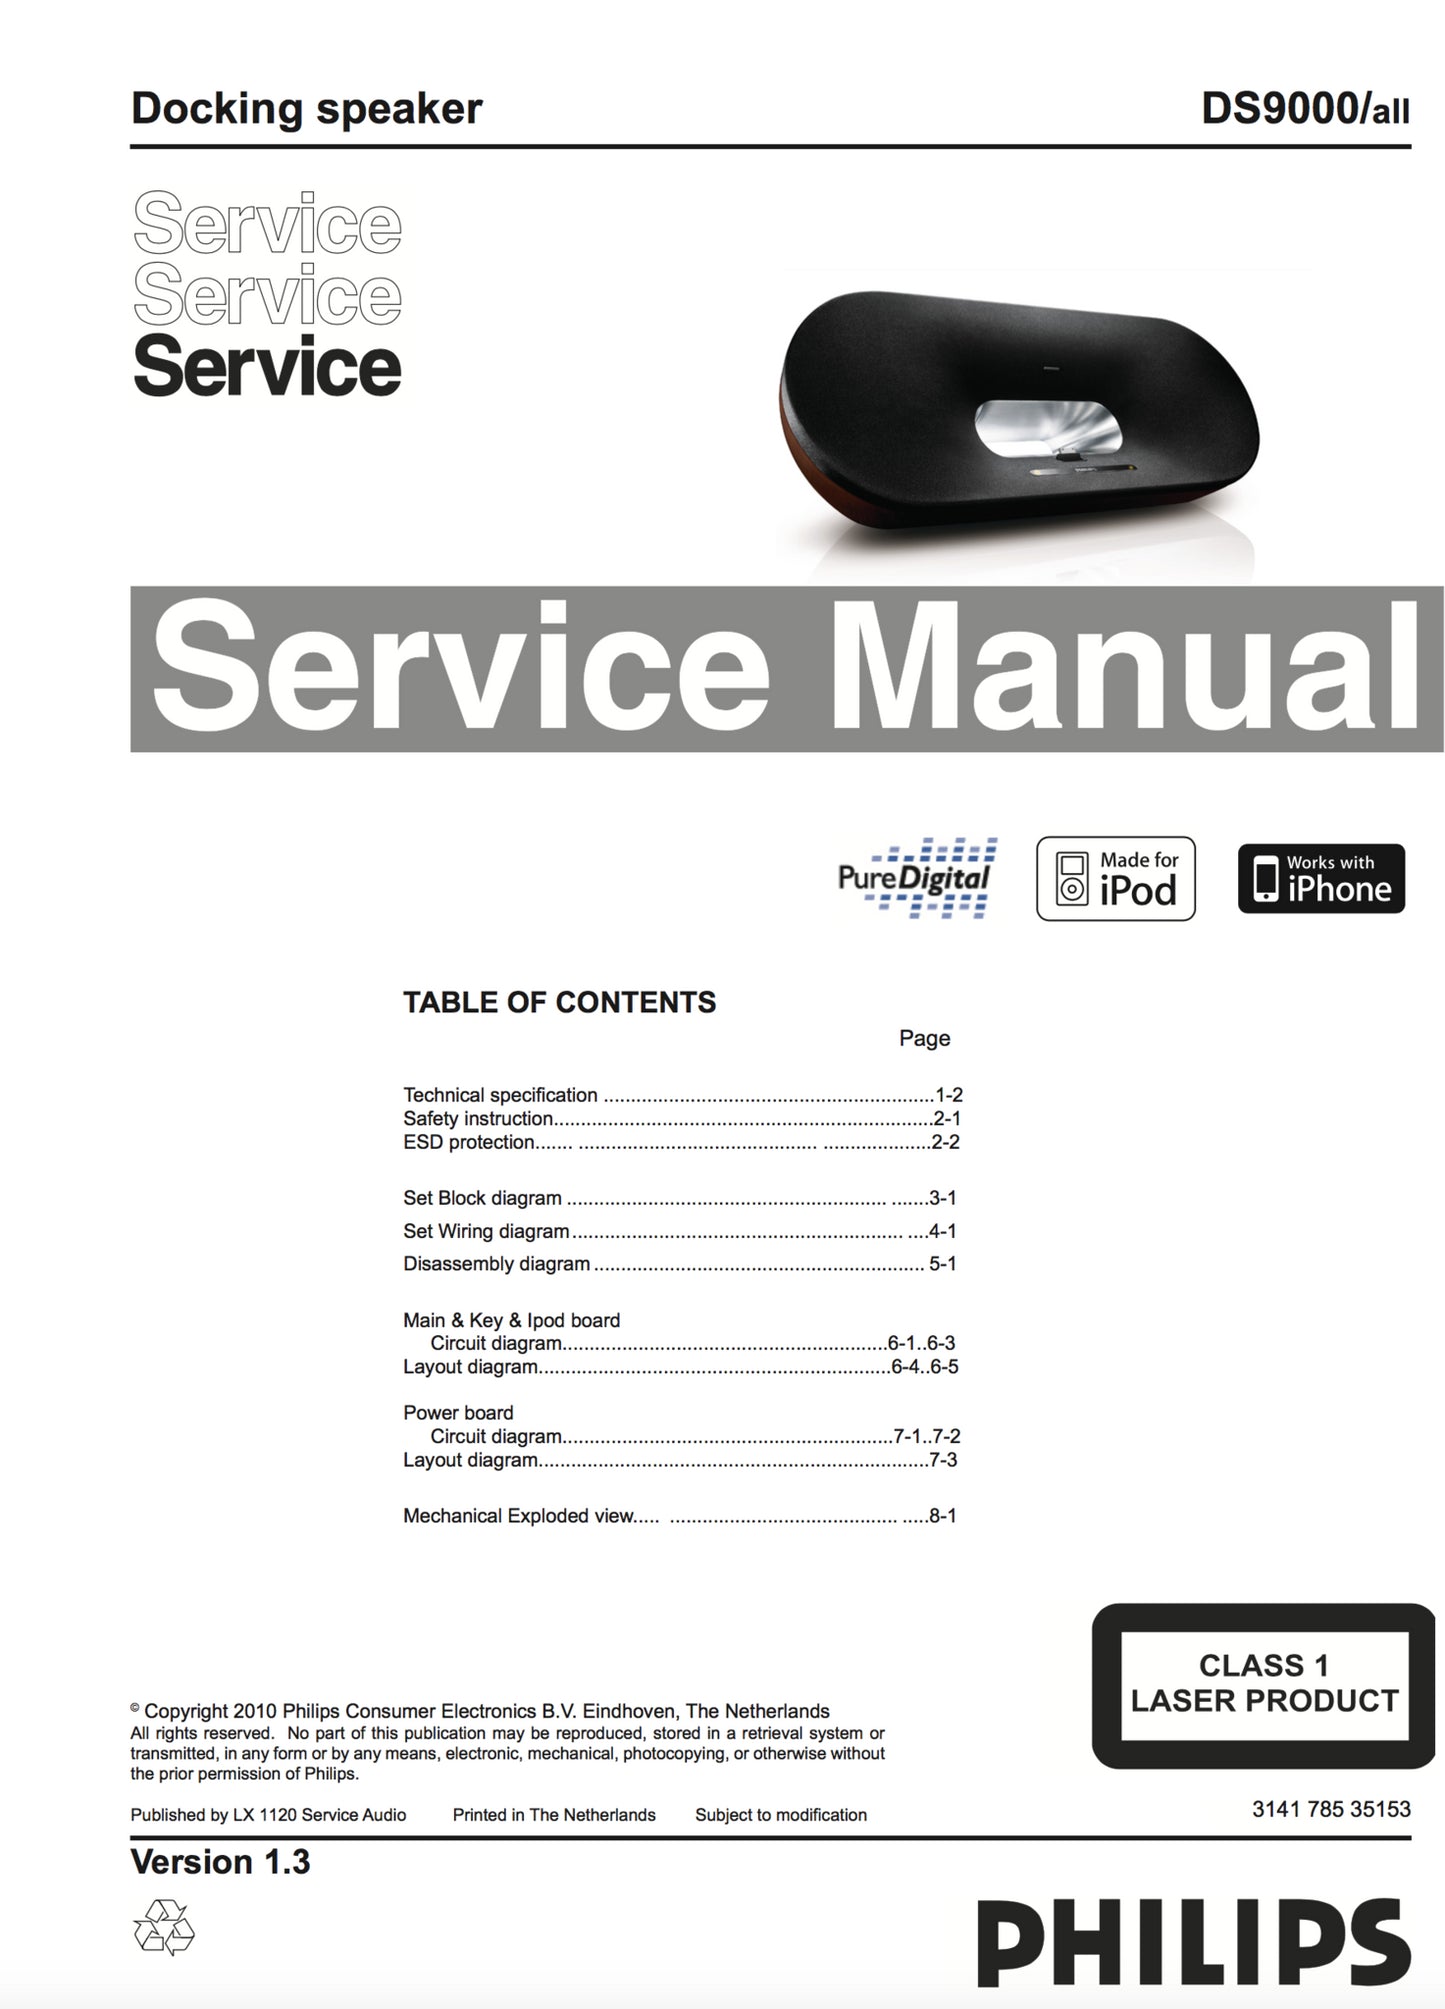 Philips DS9000 Service Manual